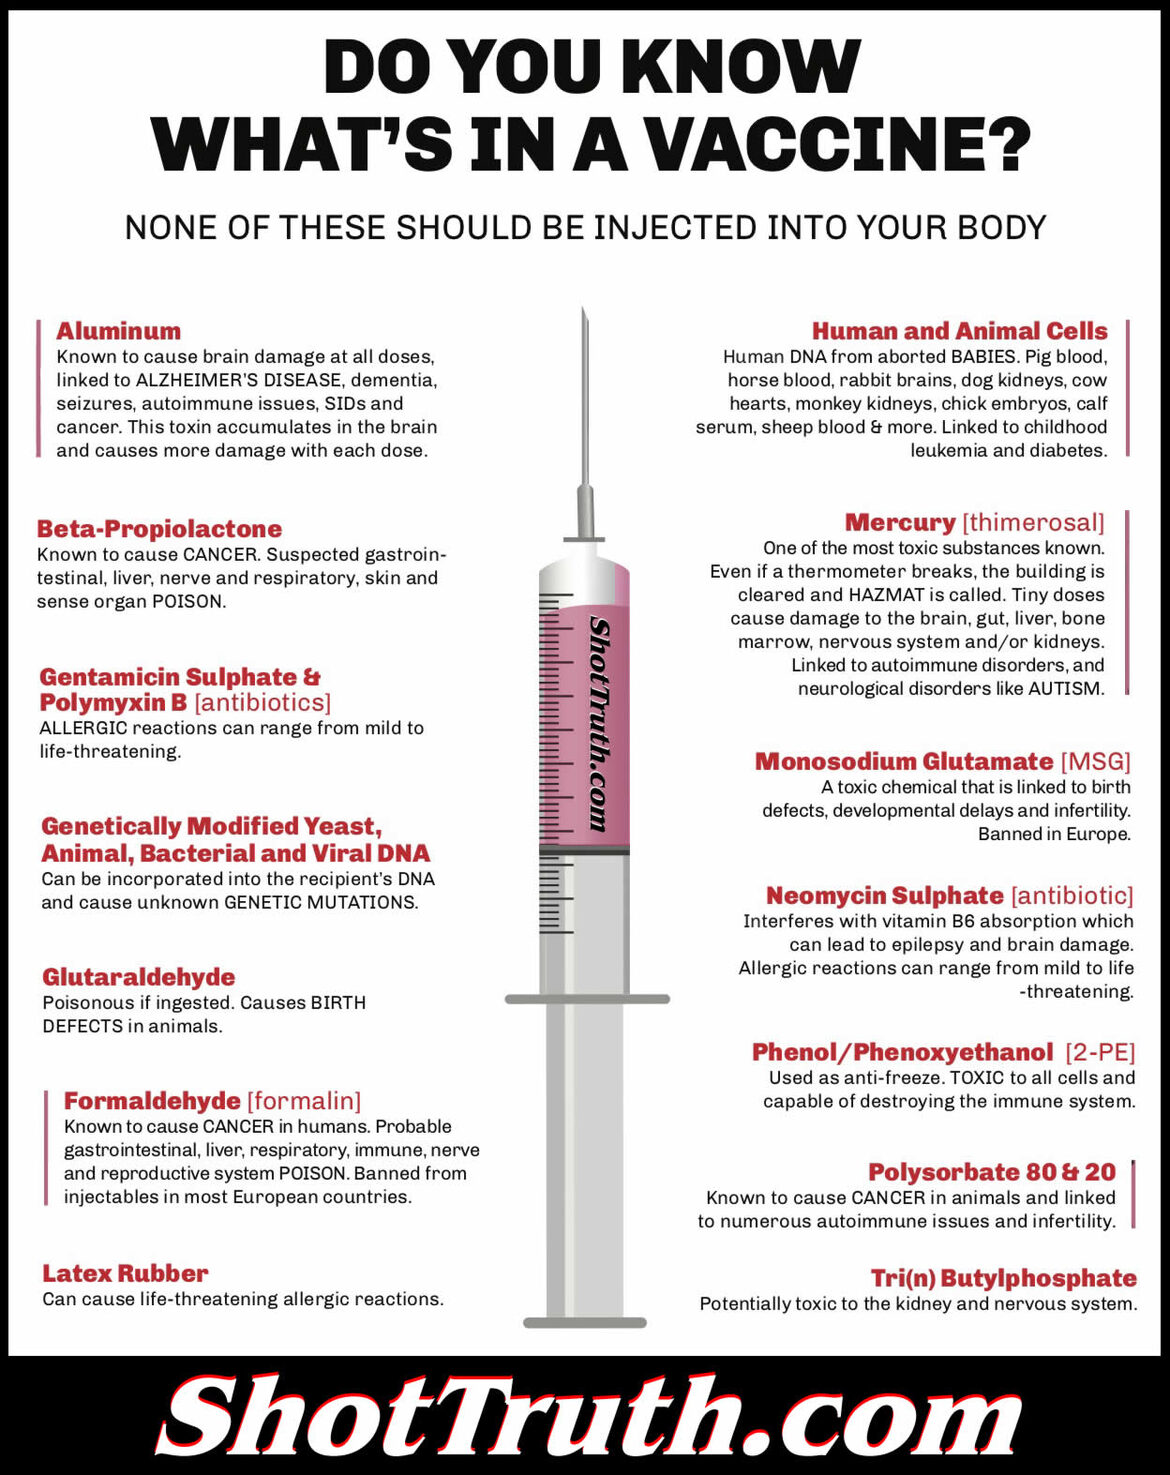 do you know what's in a vaccine?